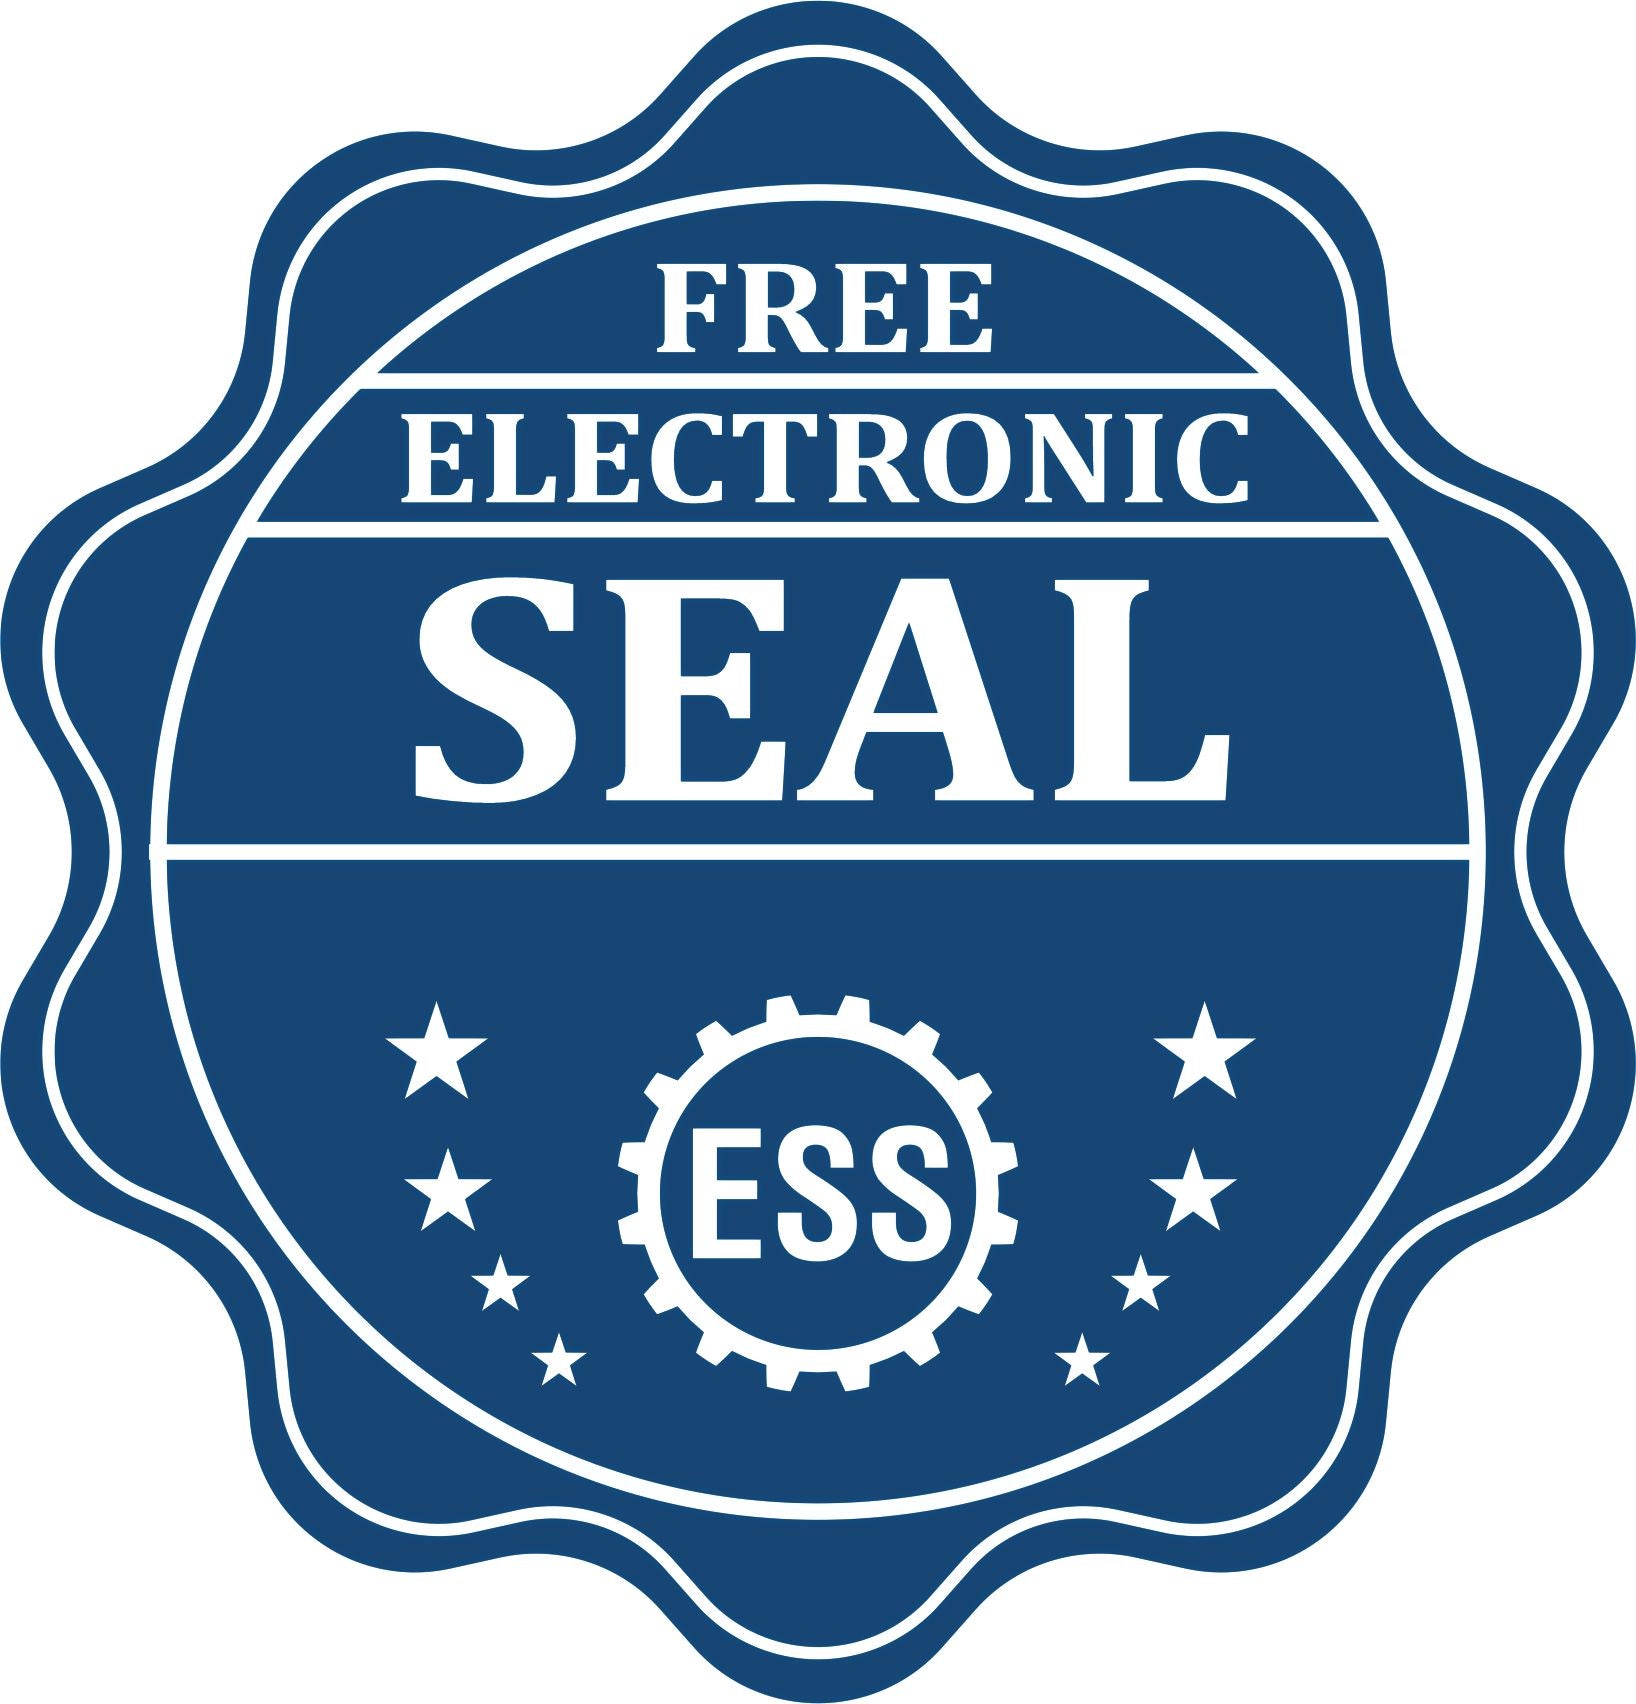 A badge showing a free electronic seal for the Heavy Duty Cast Iron Kentucky Geologist Seal Embosser with stars and the ESS gear on the emblem.